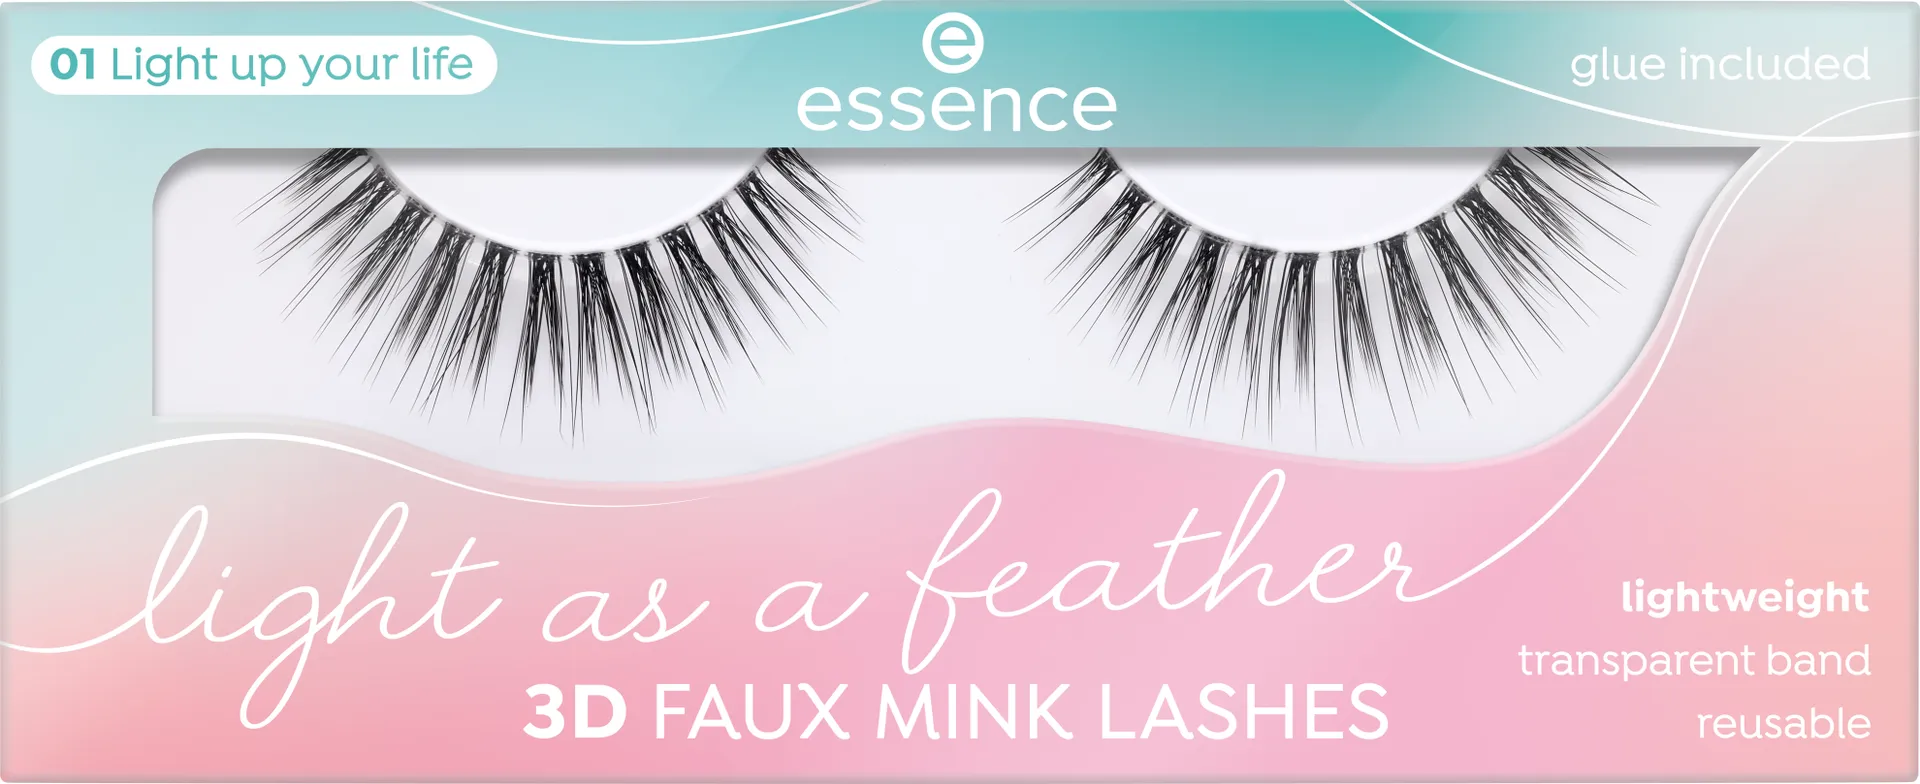 essence Light as a feather 3D faux mink irtoripset - Light up your life - 2